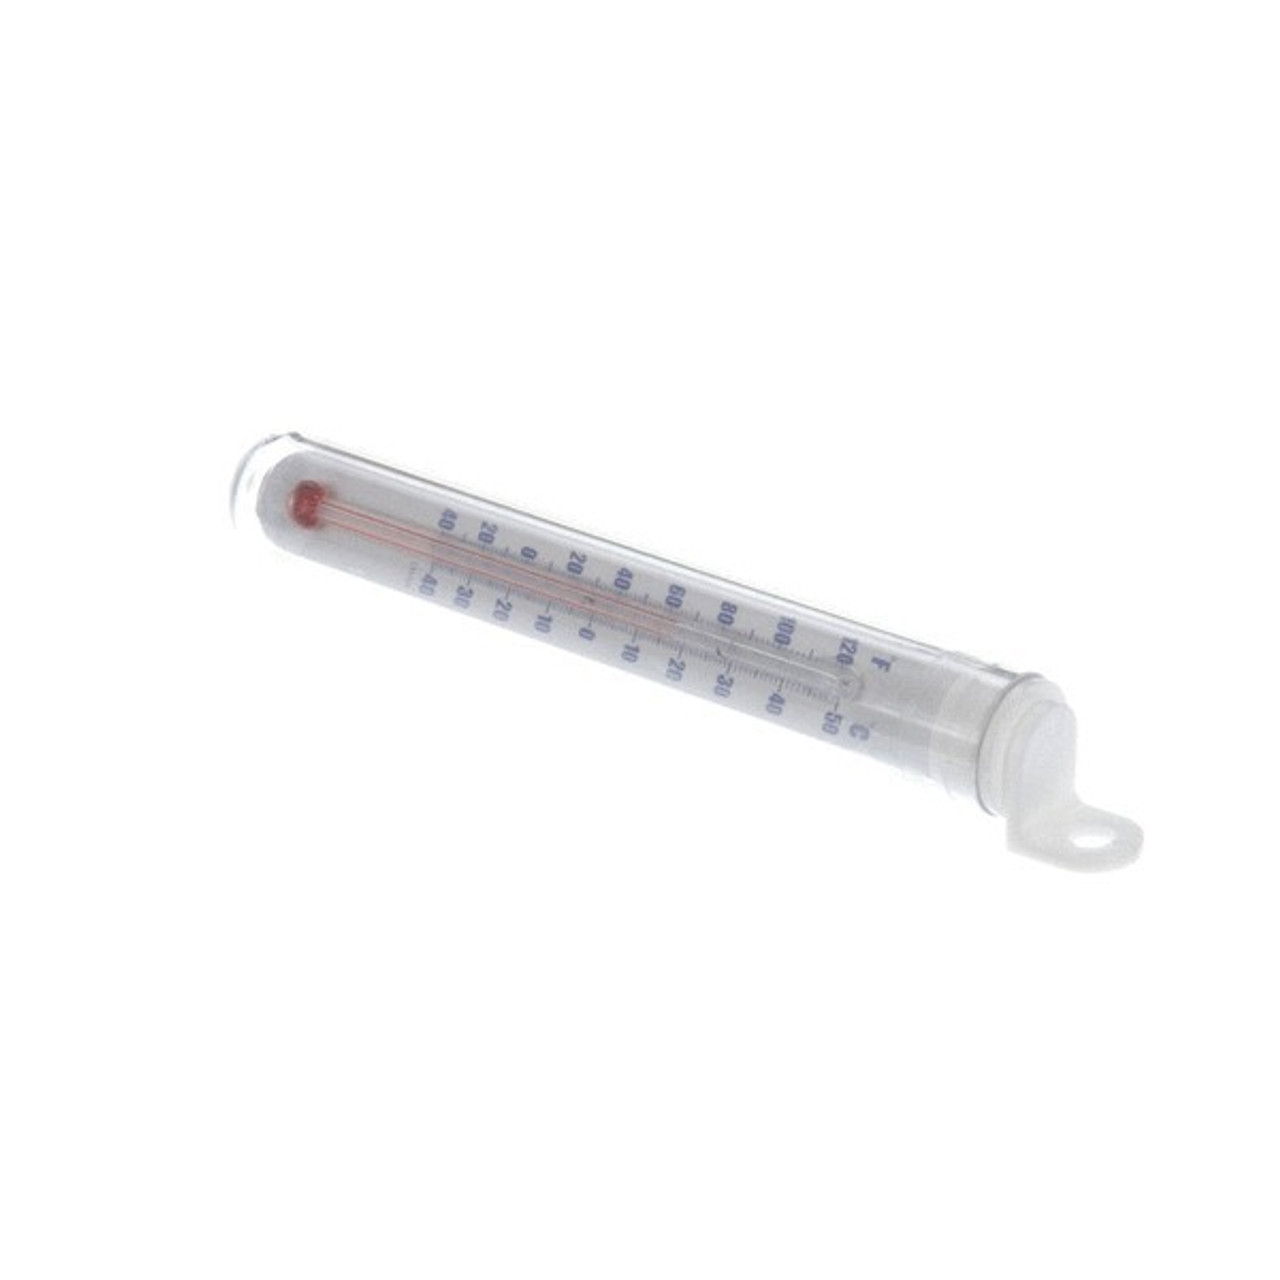 Traulsen 430037 - Thermometer